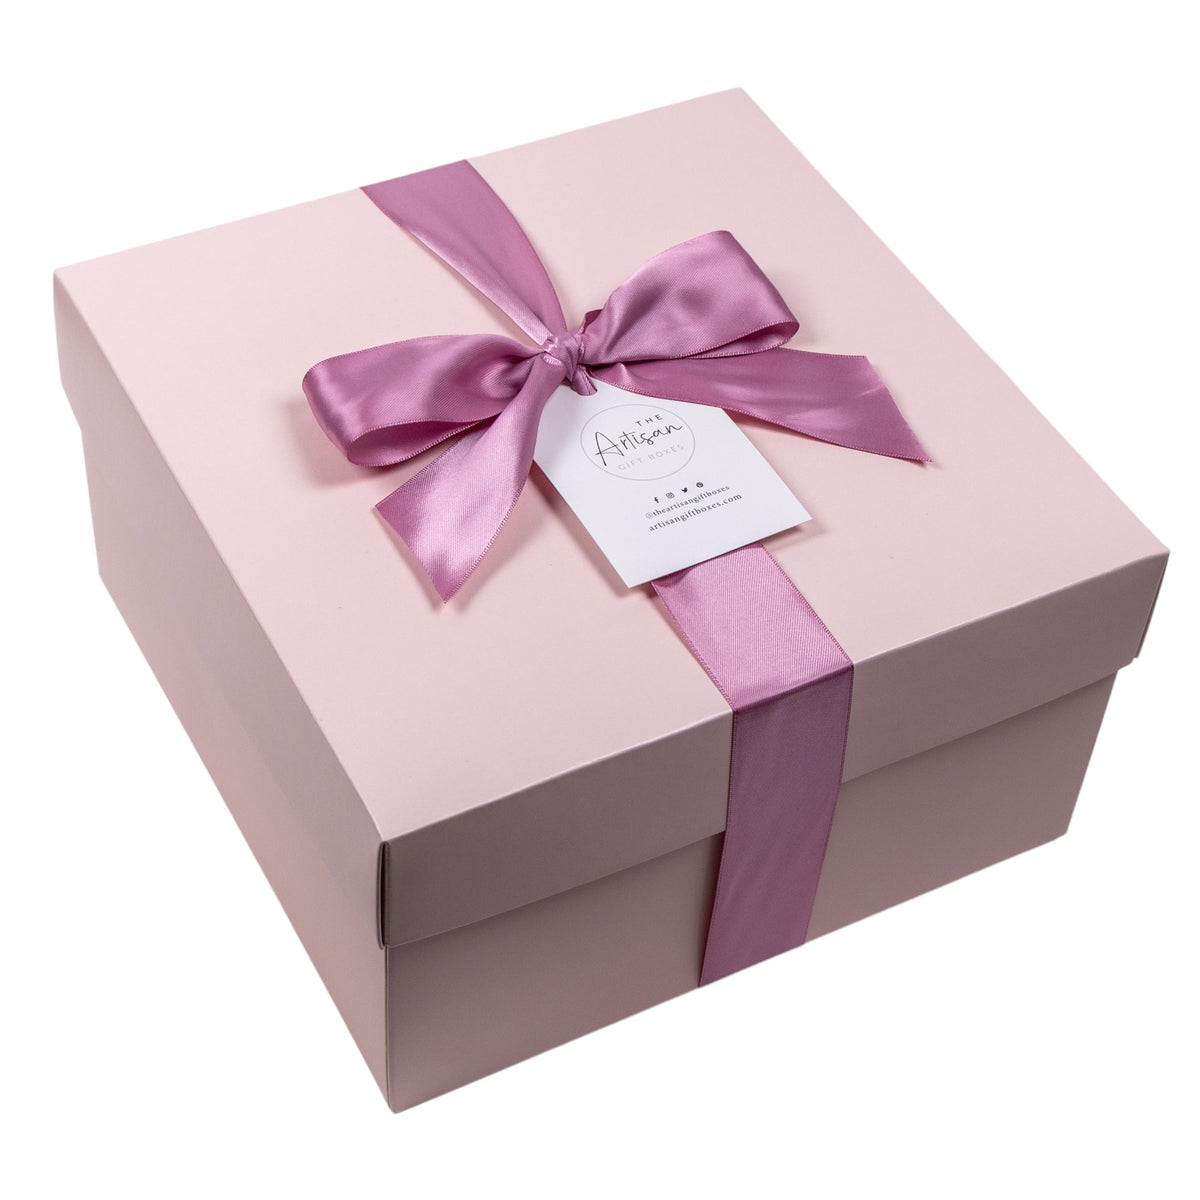 Pretty in Pink | Gift Boxes for Women Candle, Mug, cookies, hair mask The Artisan Gift Boxes 